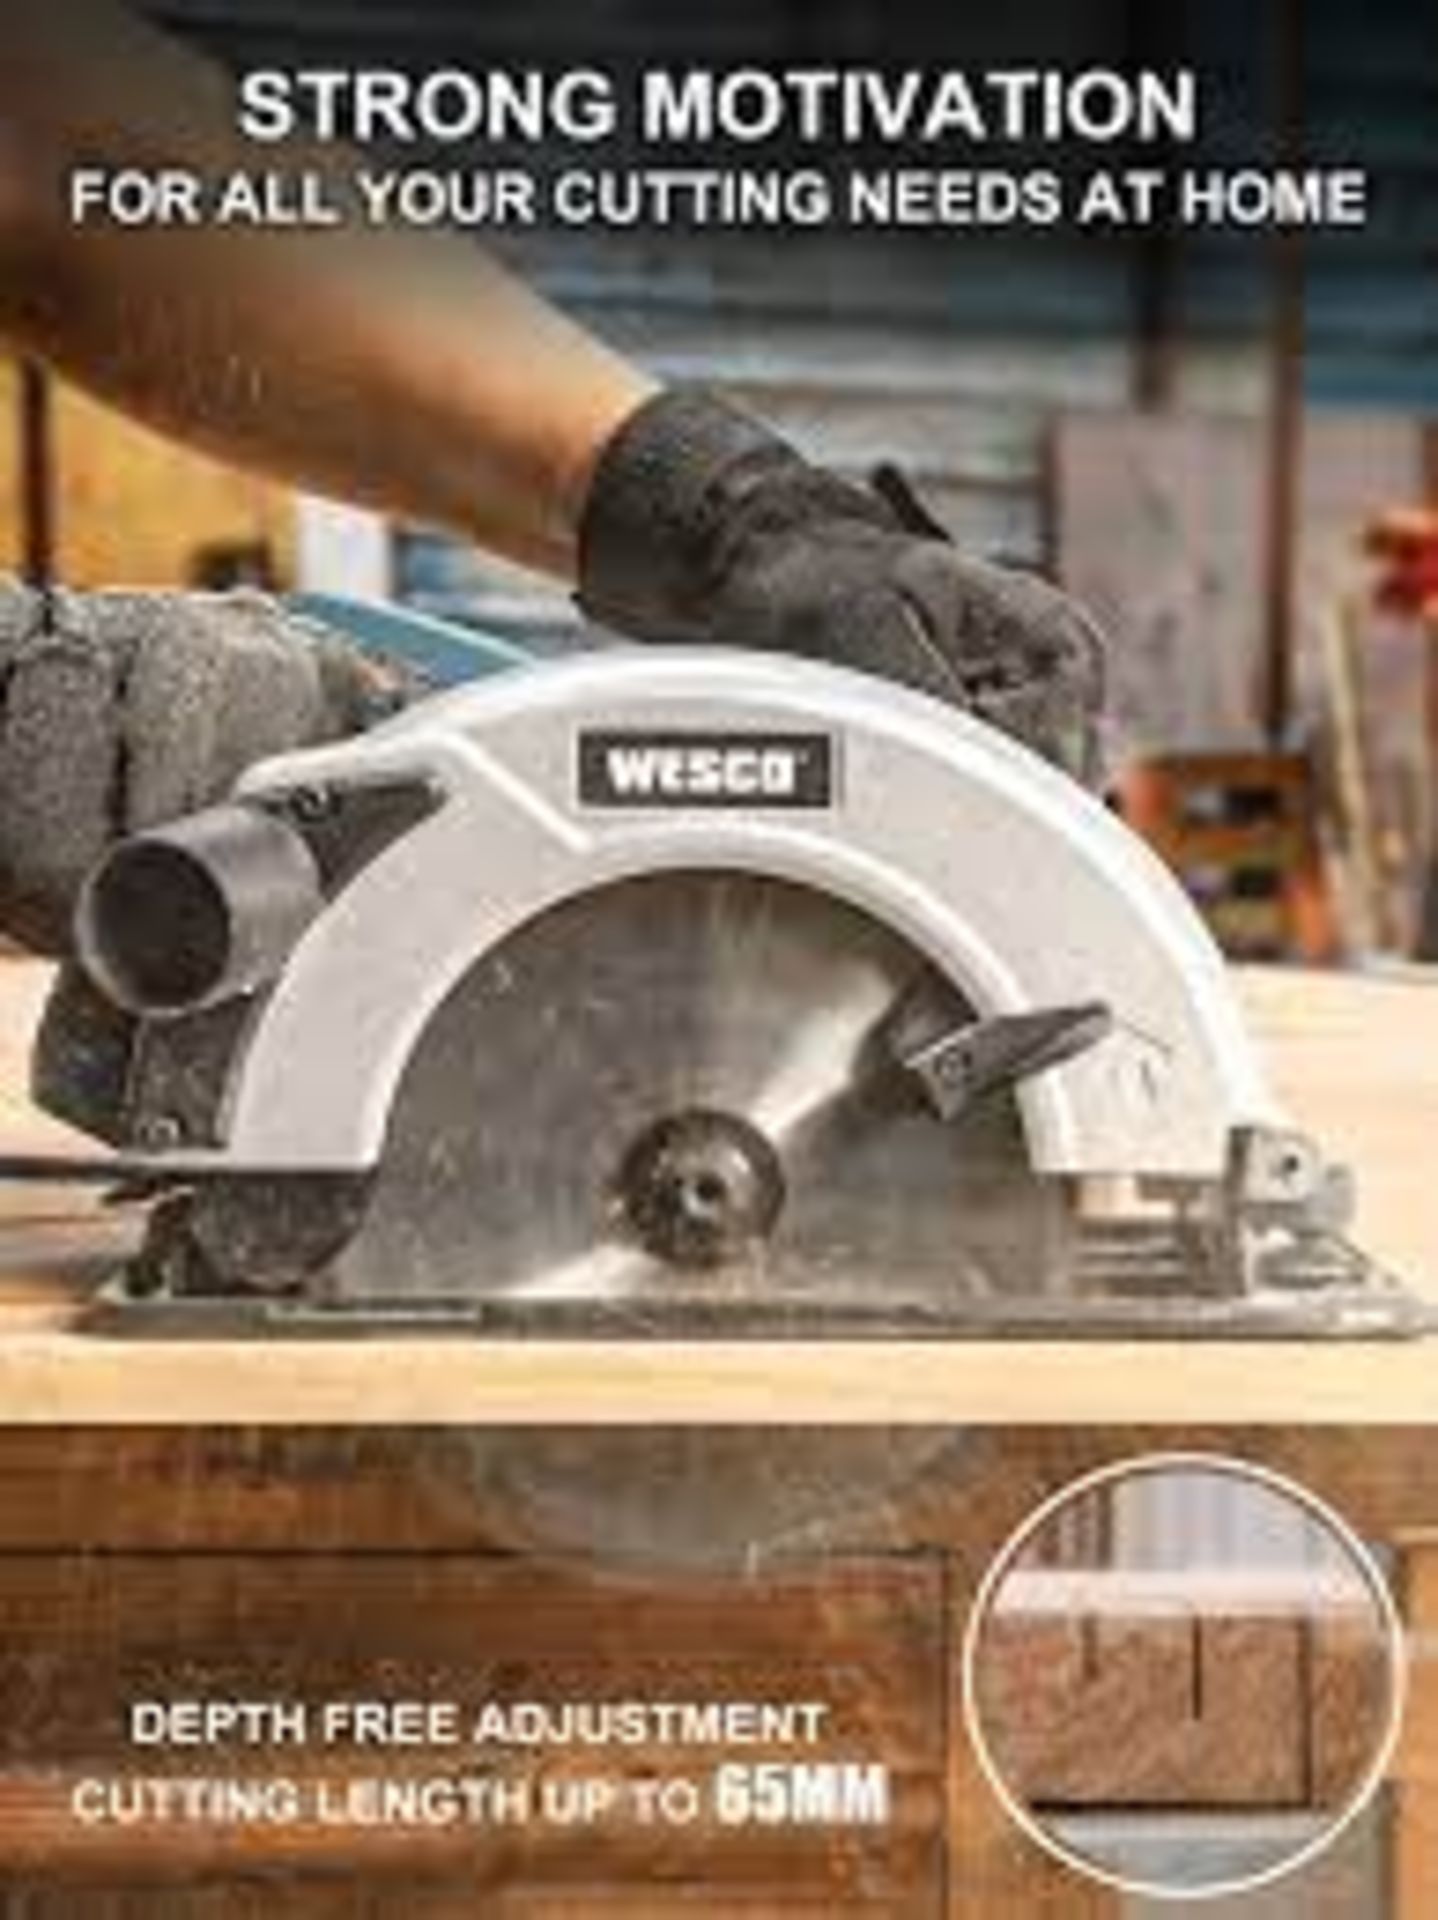 New & Boxed WESCO Circular Saw 1400W 5800 RPM Skill Saw. Cutting Depth: 90°: 65mm-45°: 45mm. with - Image 2 of 2